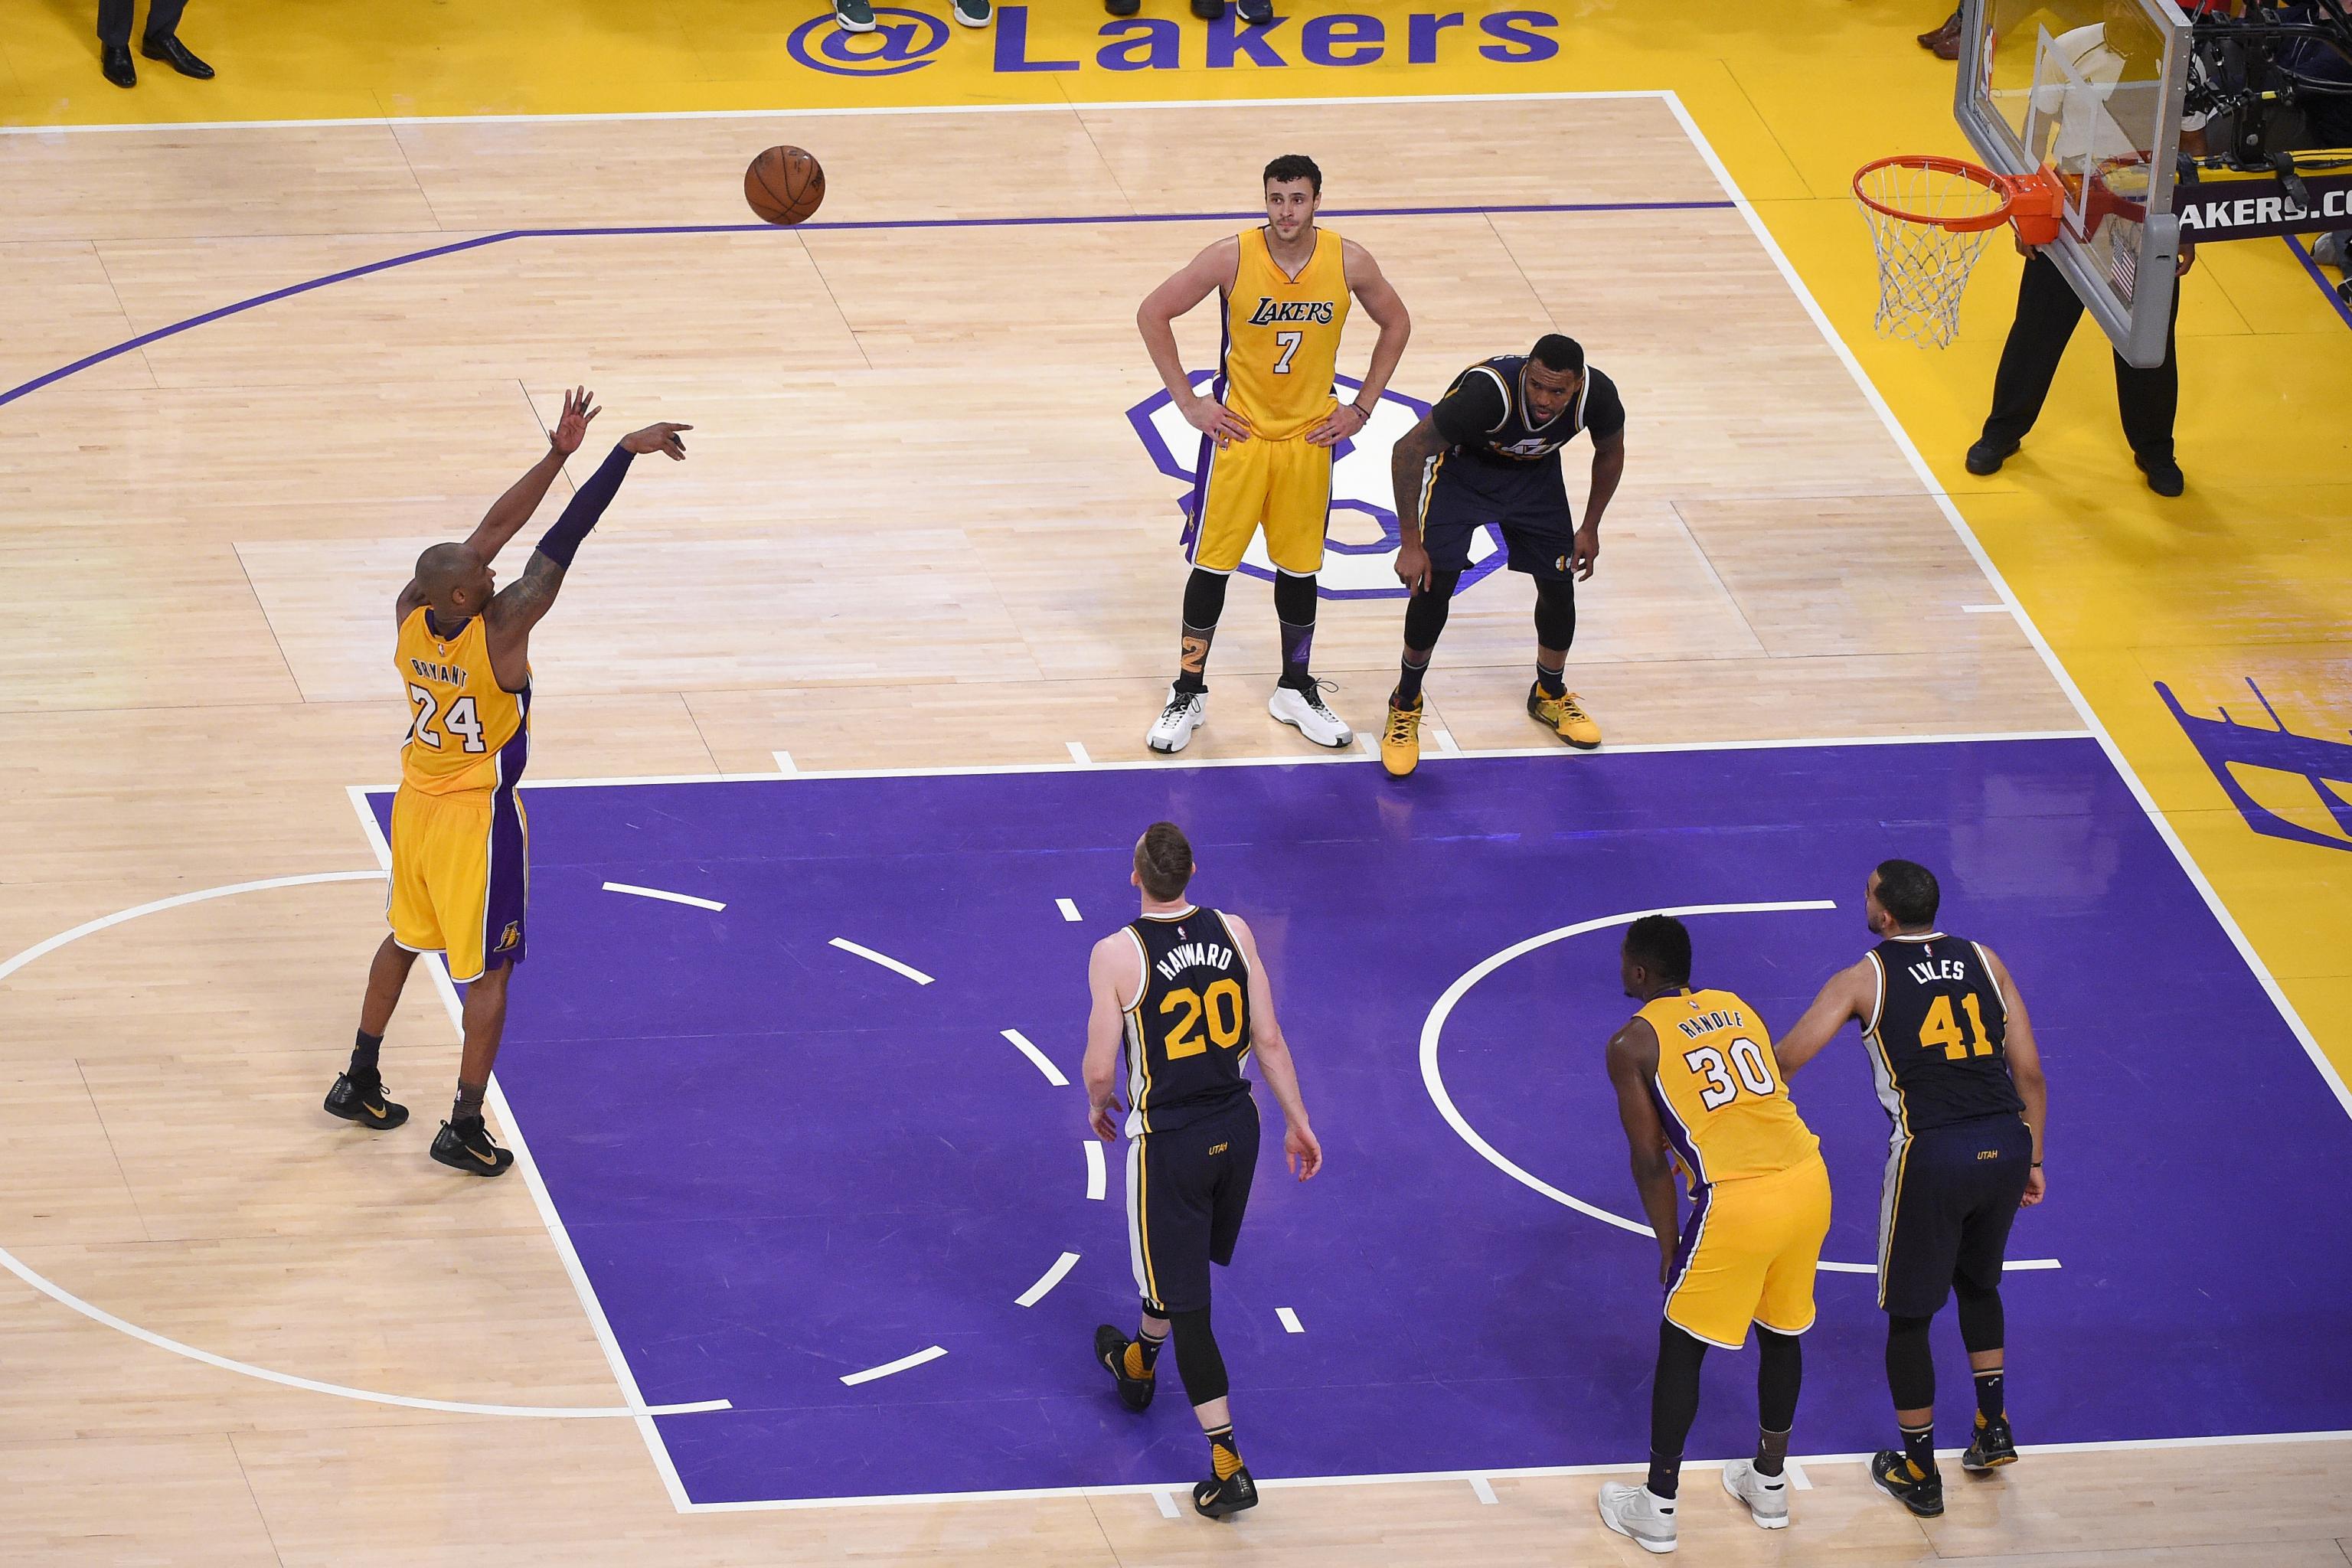 Los Angeles Lakers forward Kobe Bryant (24) shoots a free throw to